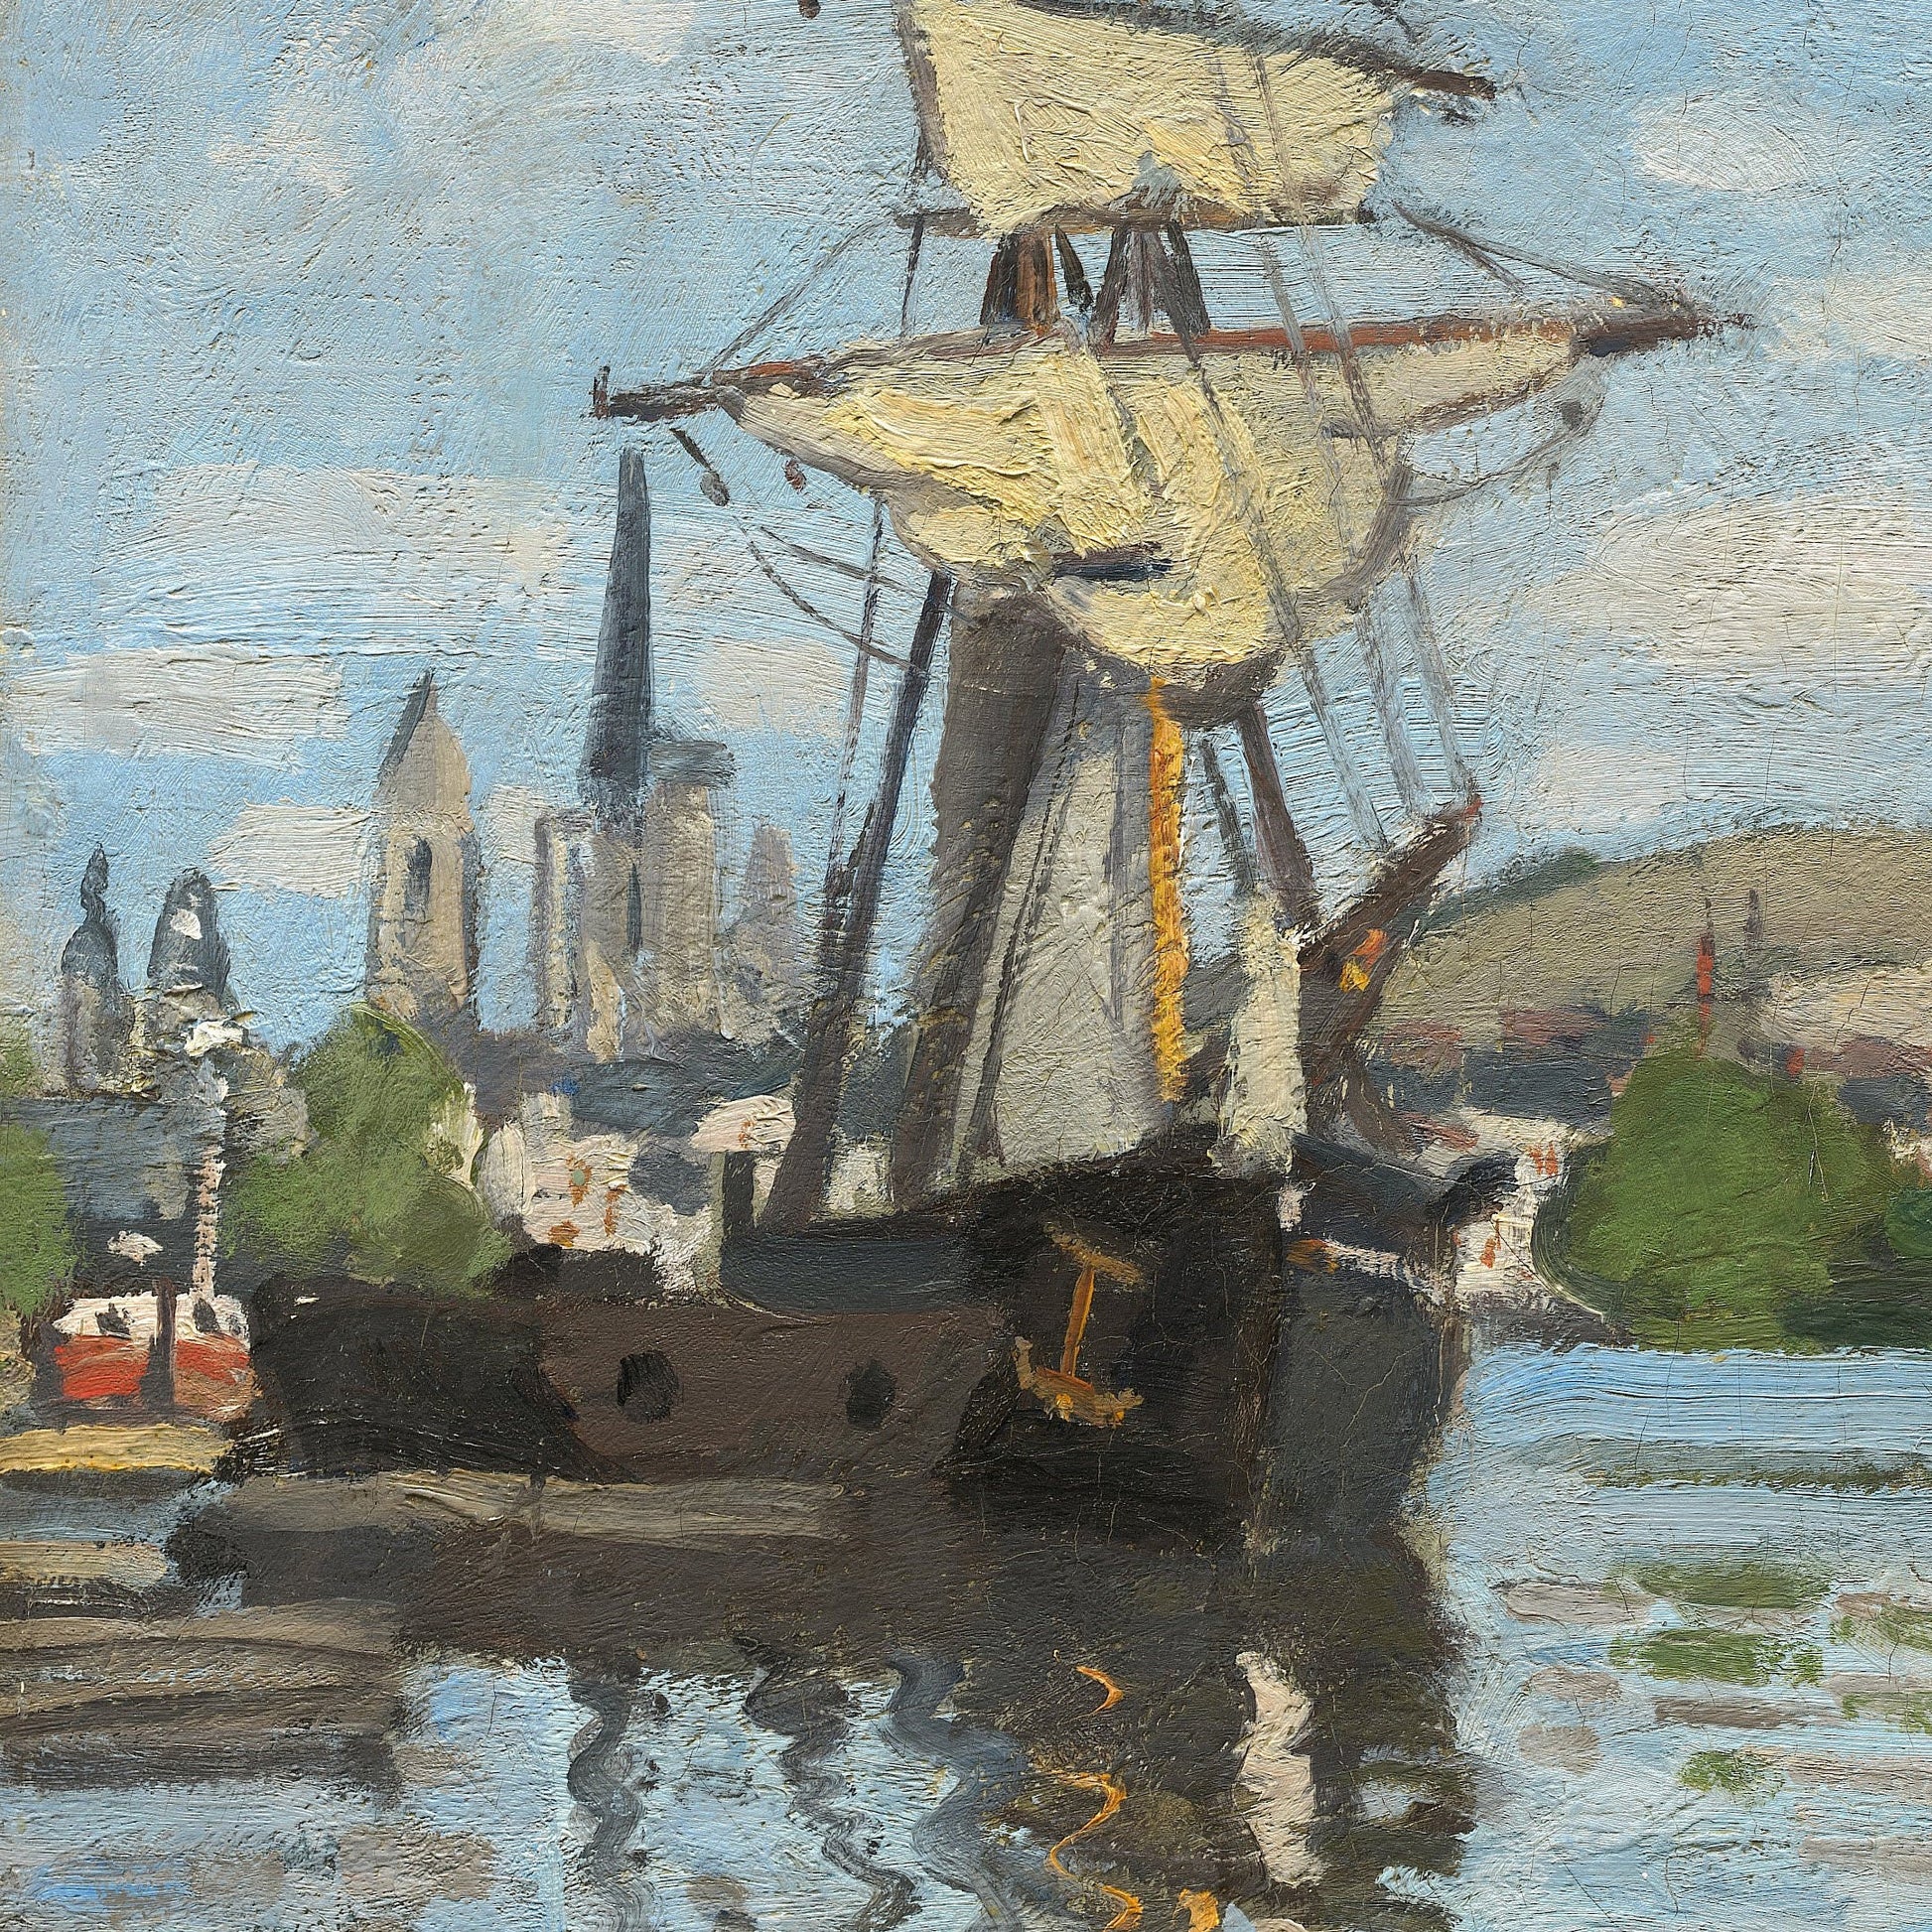 Ships Riding on the Seine at Rouen by Claude Monet, 3d Printed with texture and brush strokes looks like original oil-painting, code:350